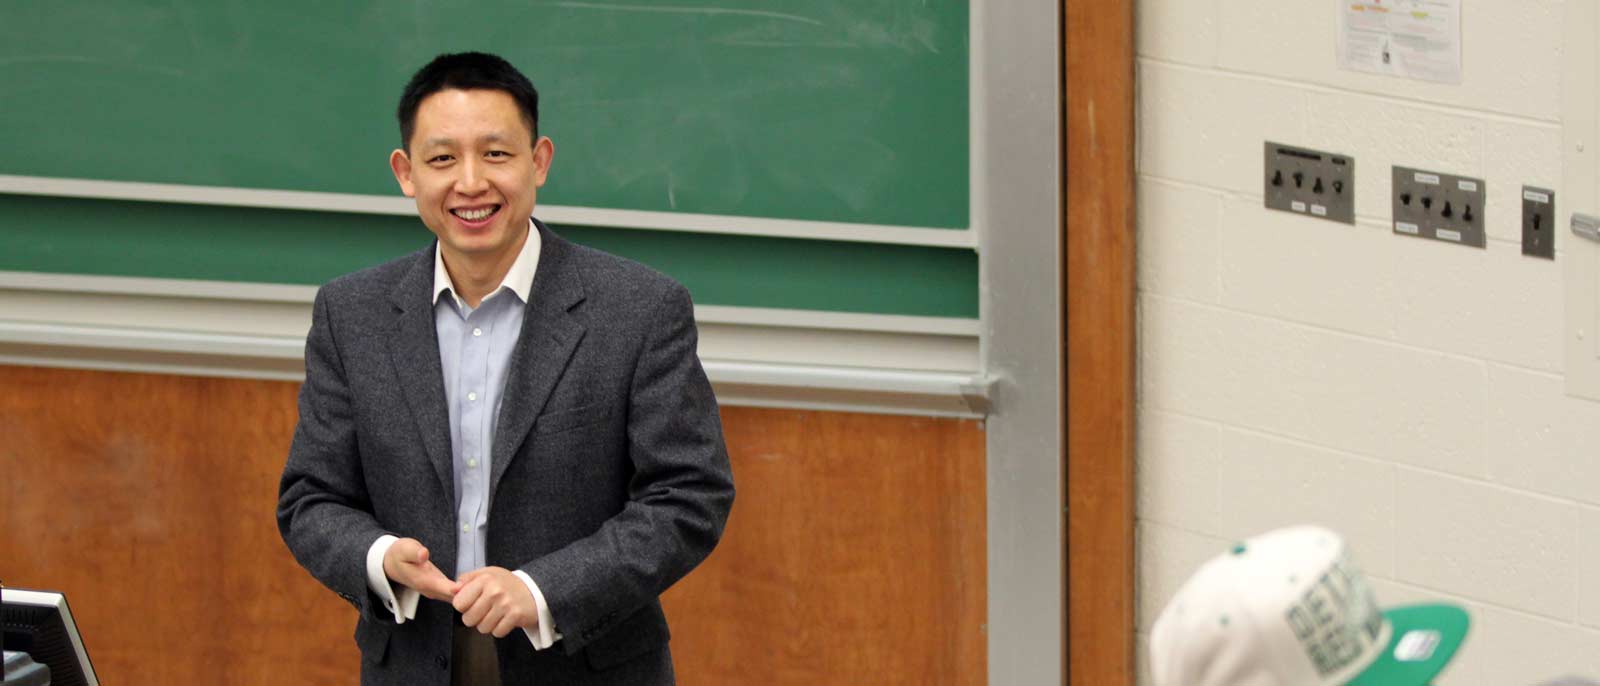 Accounting and Information Systems' faculty member, Xuefeng Jiang, smiles as he stands in front of the classroom during an accounting course at MSU.